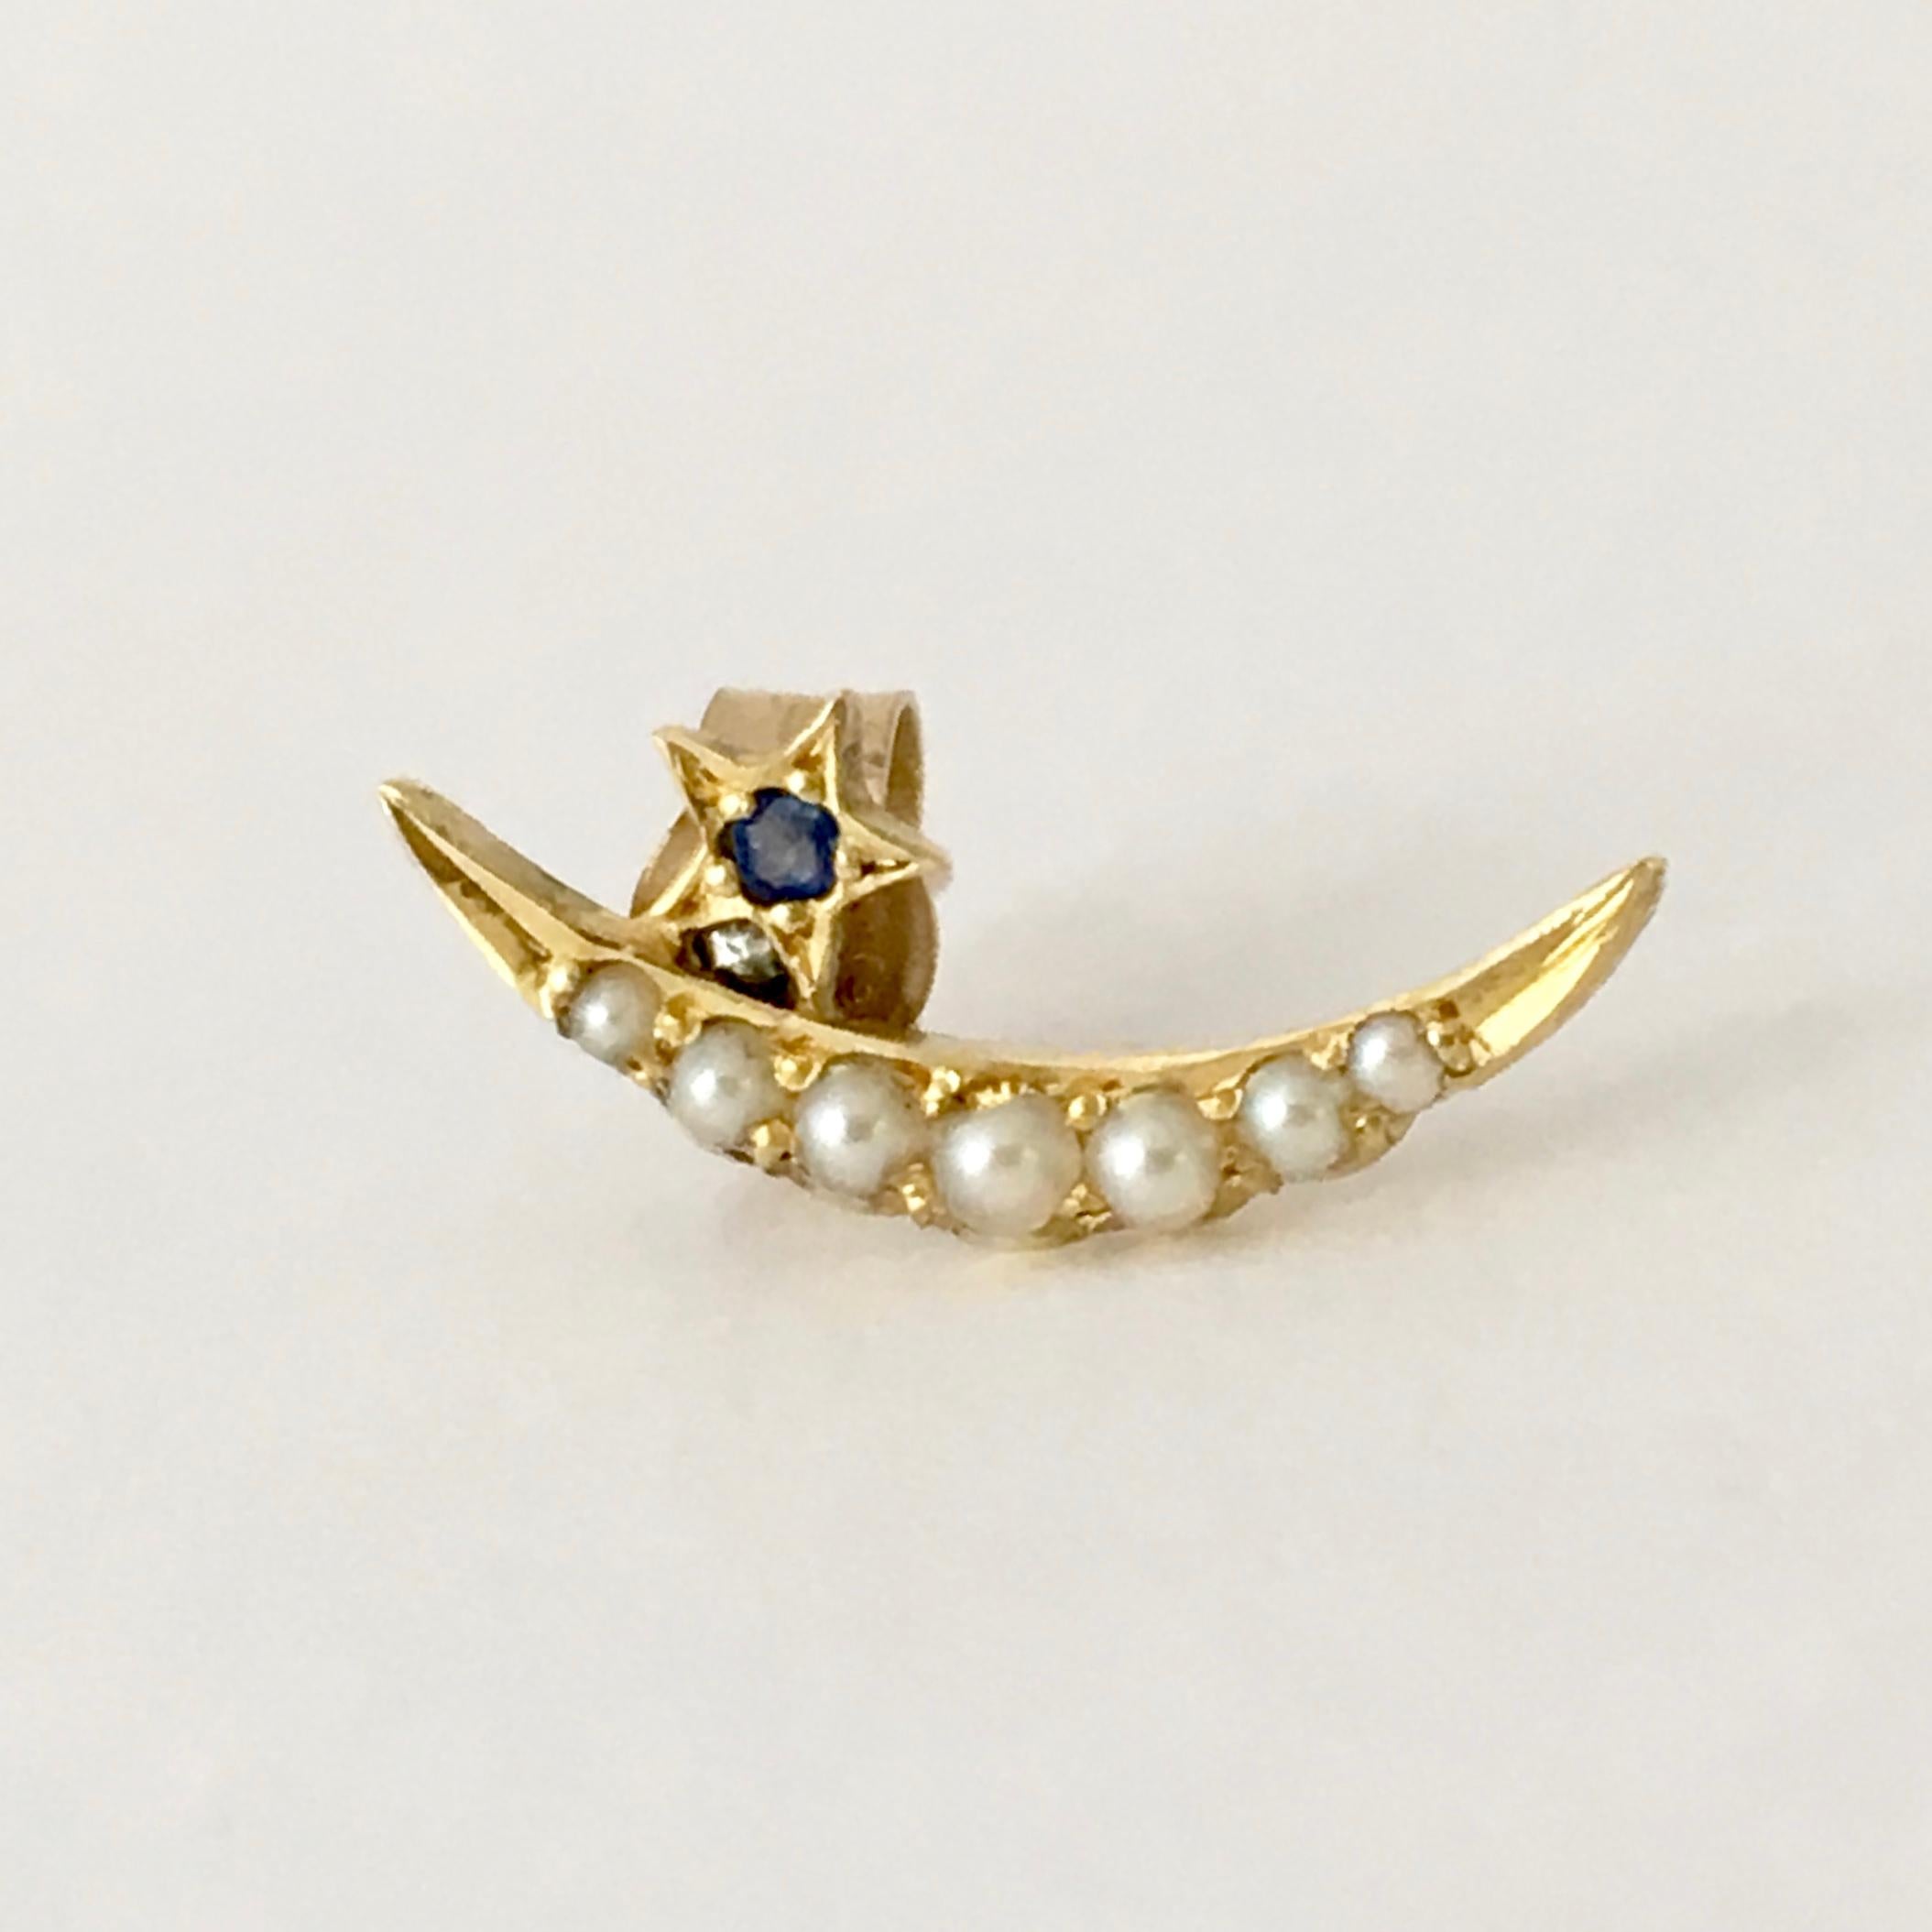 This dainty 9ct gold single earring combines seven seed pearls with a tiny sapphire, perfectly reflecting the night sky. The condition is remarkable for such a delicate piece and the celestial theme is particularly on trend at the moment. 

The moon